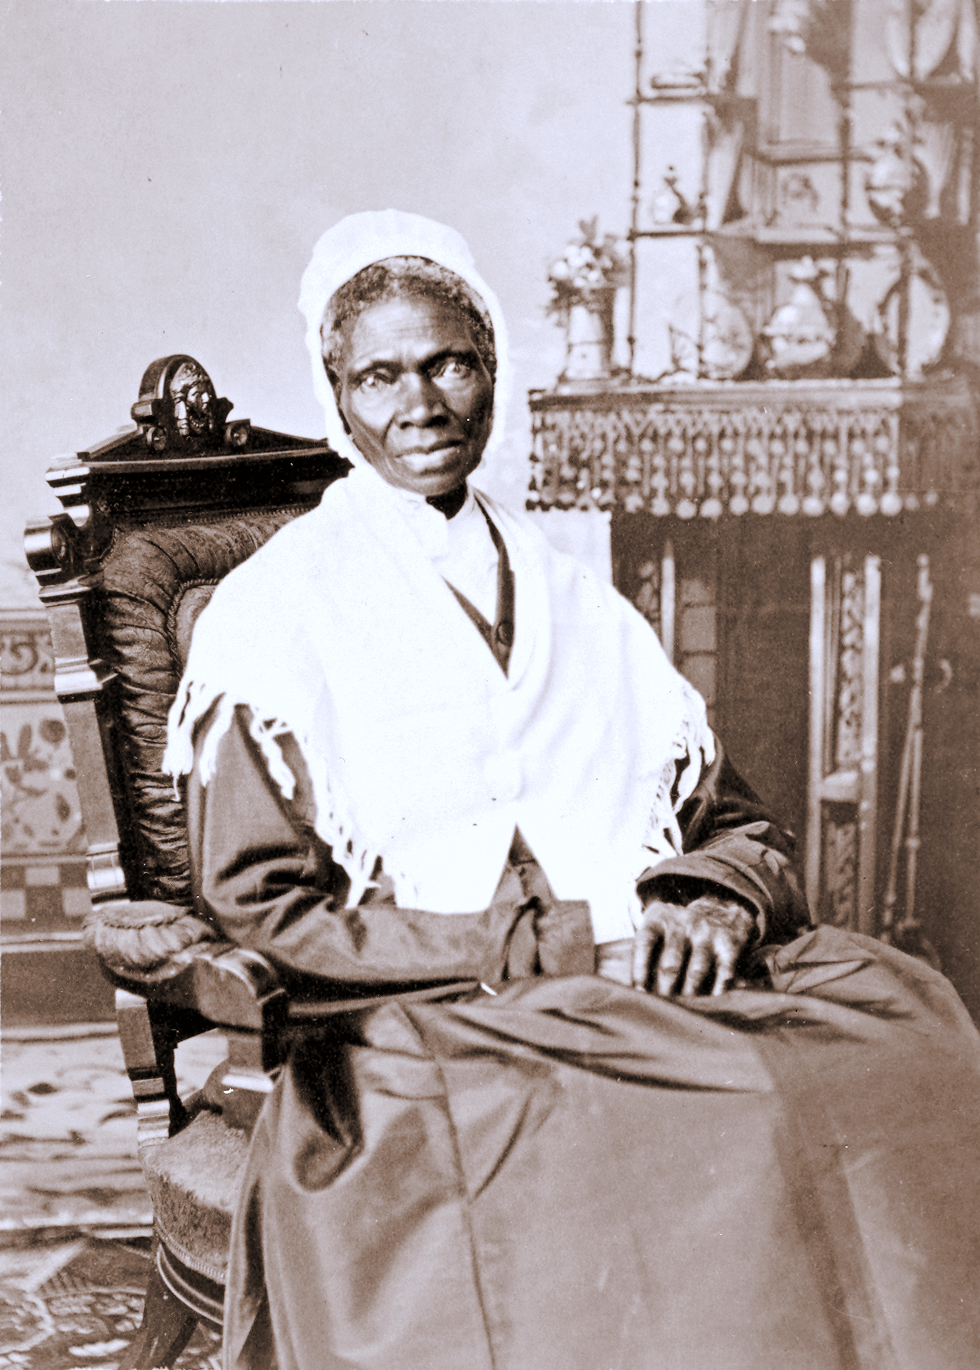 Born into slavery, Sojourner Truth became an itinerant Methodist preacher and advocated for freedom for the slave, justice for the poor and equality for women. Portrait of Sojourner Truth from the National Portrait Gallery, Smithsonian Institution, courtesy of Wikimedia Commons.